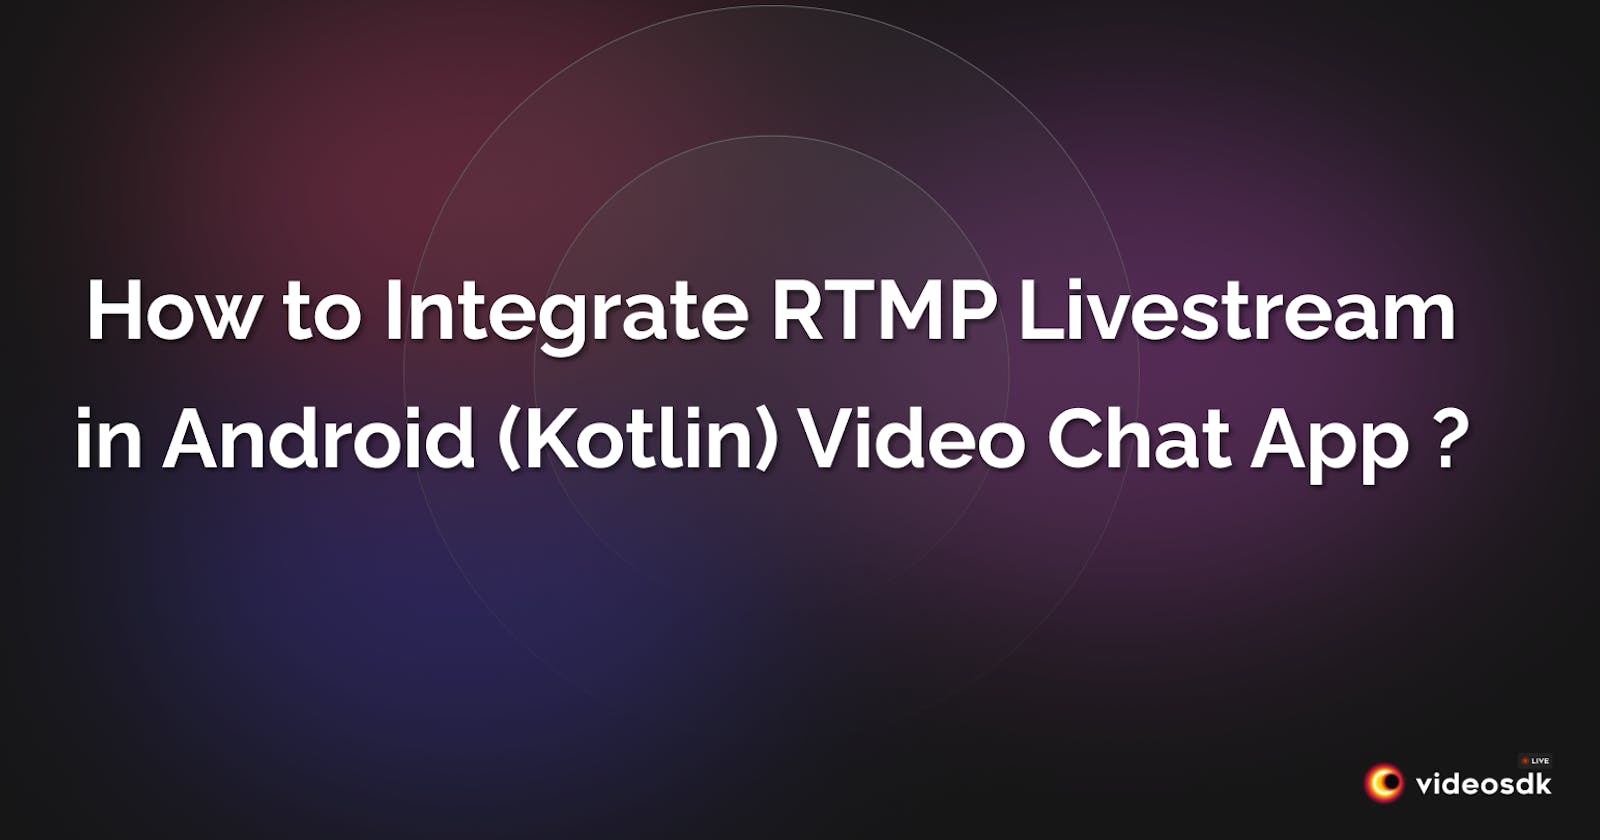 How to Integrate RTMP Livestream Feature in Android(Kotlin) Video Chat App?